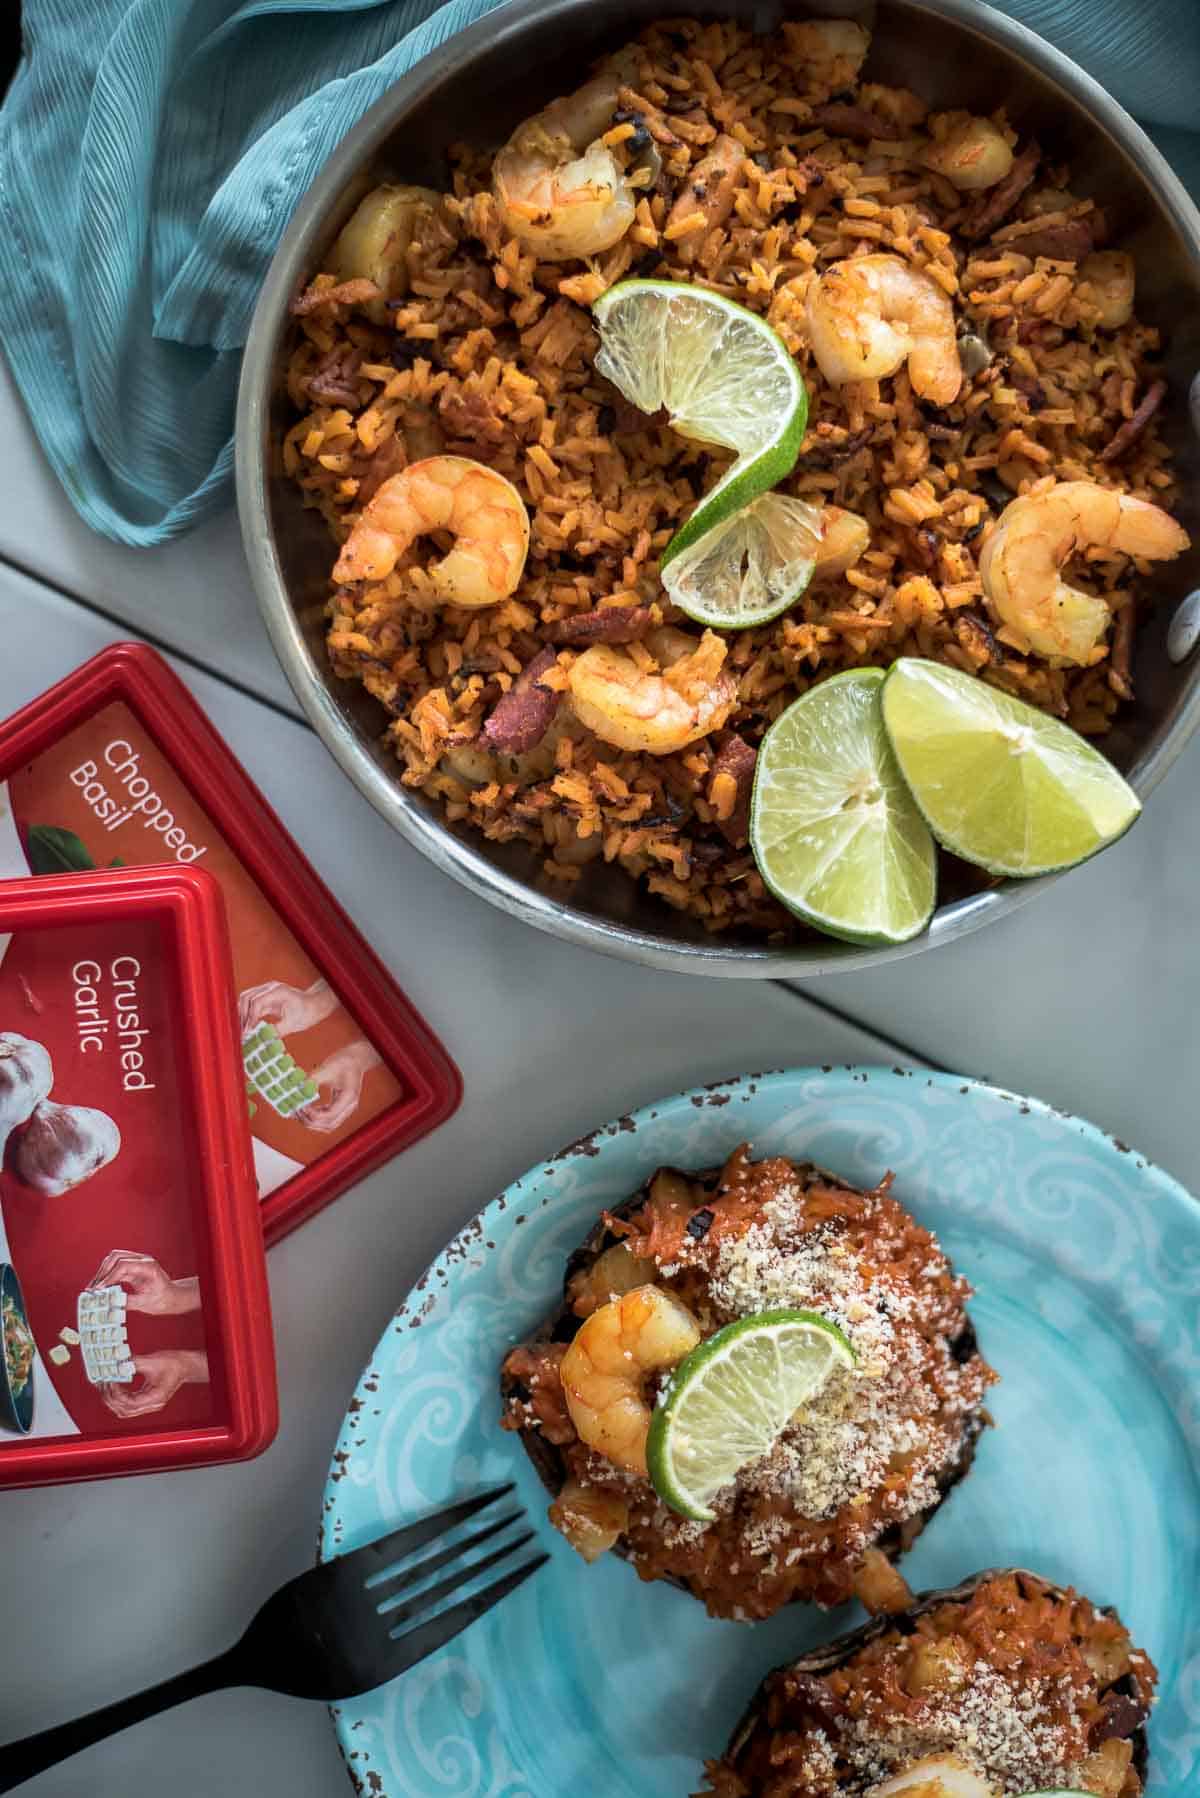 Jazz up your weeknight dinner with these Easy Paella Stuffed Portobello Mushrooms! Perfect 30-minute shrimp & chorizo paella baked inside giant, satisfying mushroom caps is a great way to increase veggies and decrease starches.